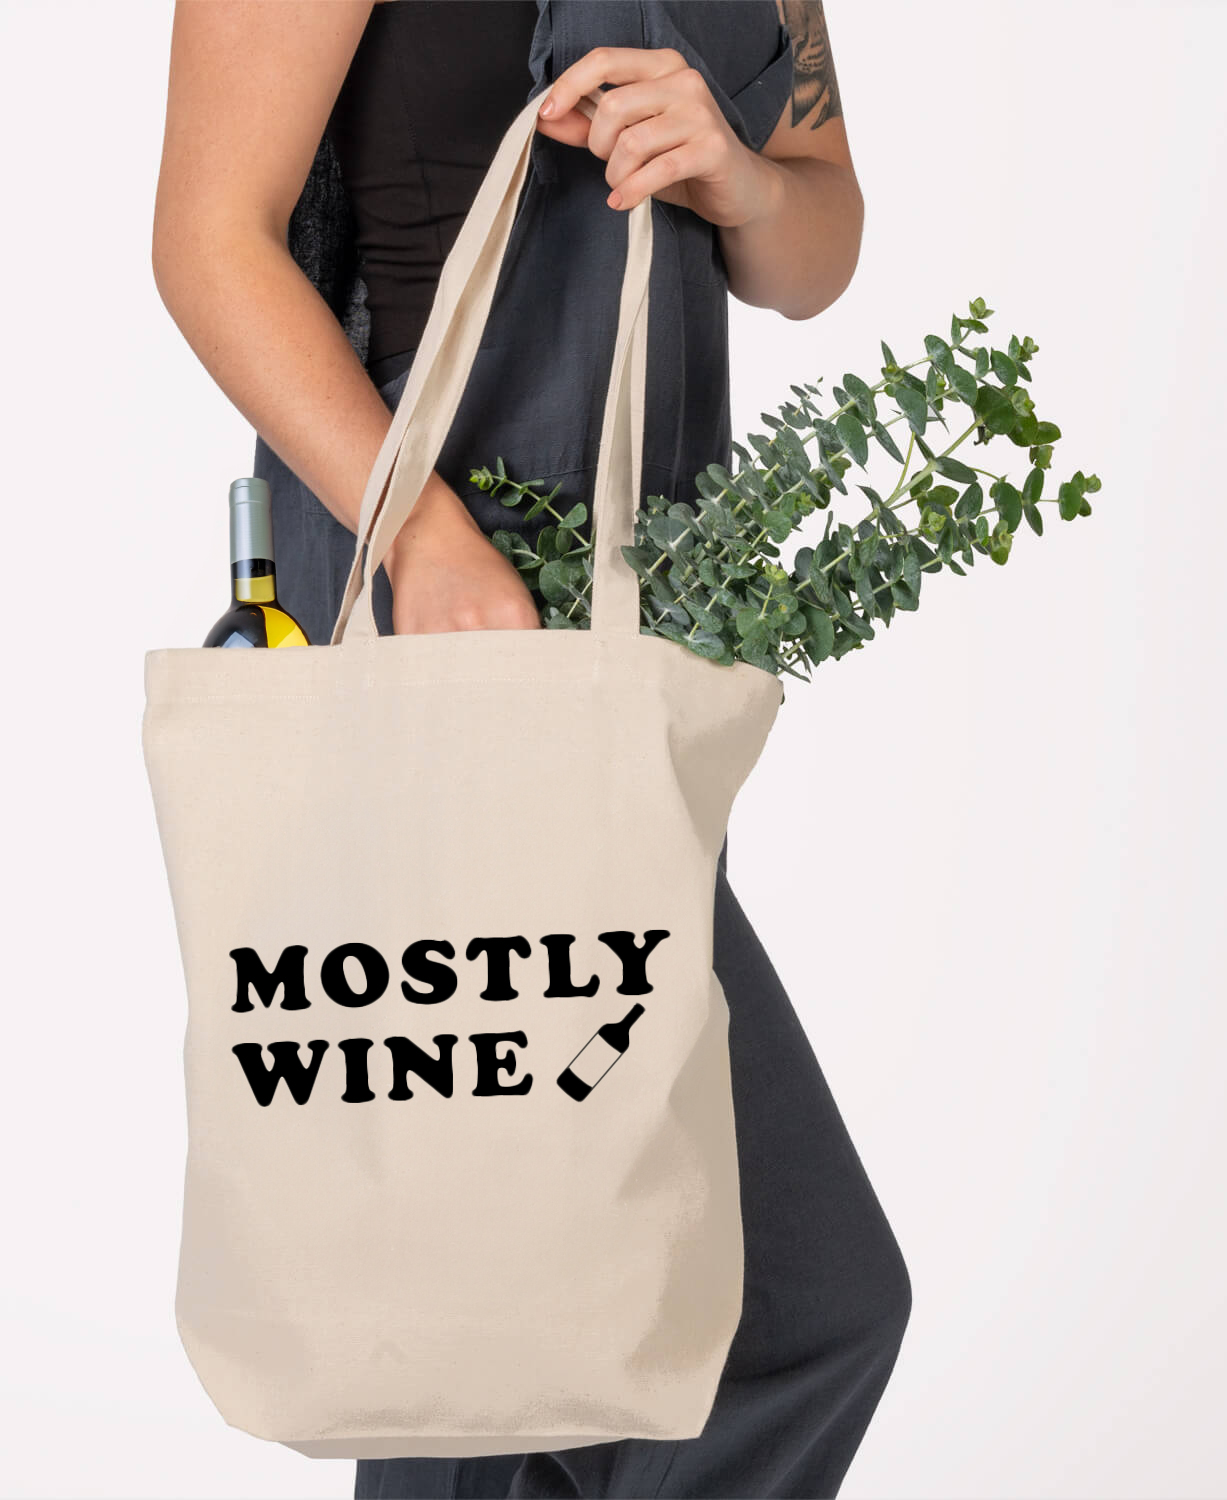 NEW! Mostly Wine Tote Bag